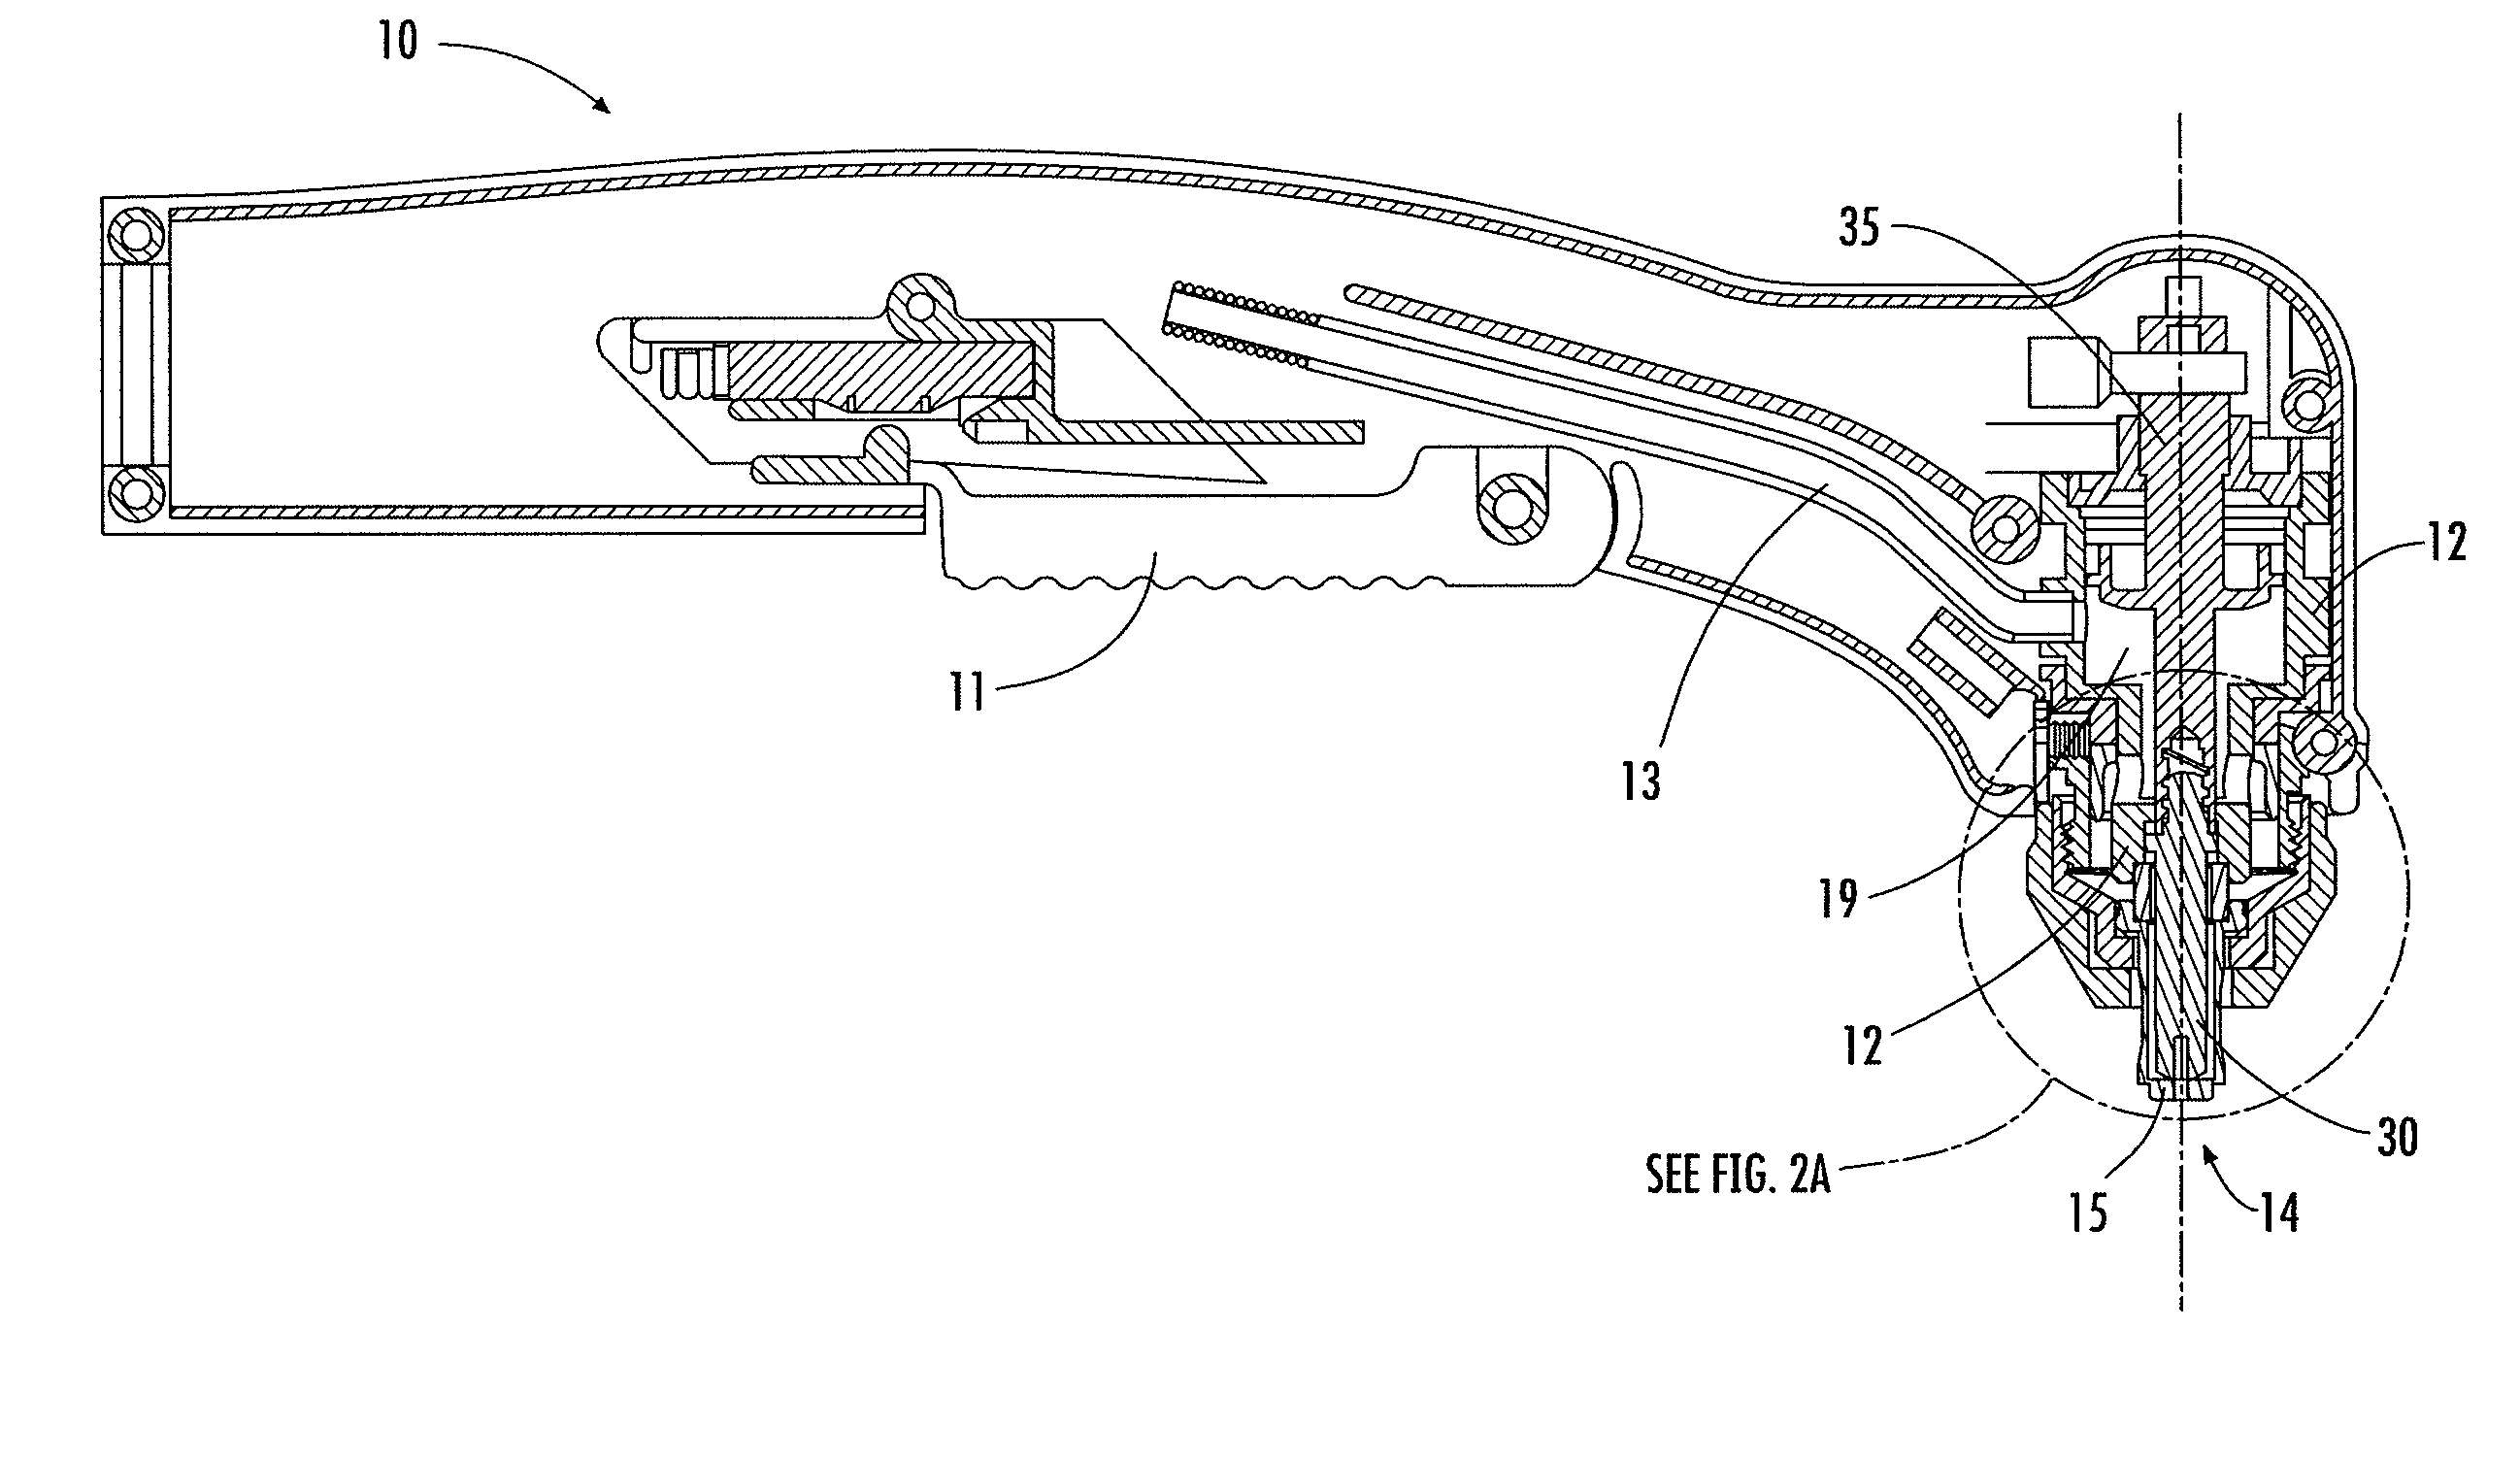 Plasma torch with electrode wear detection system